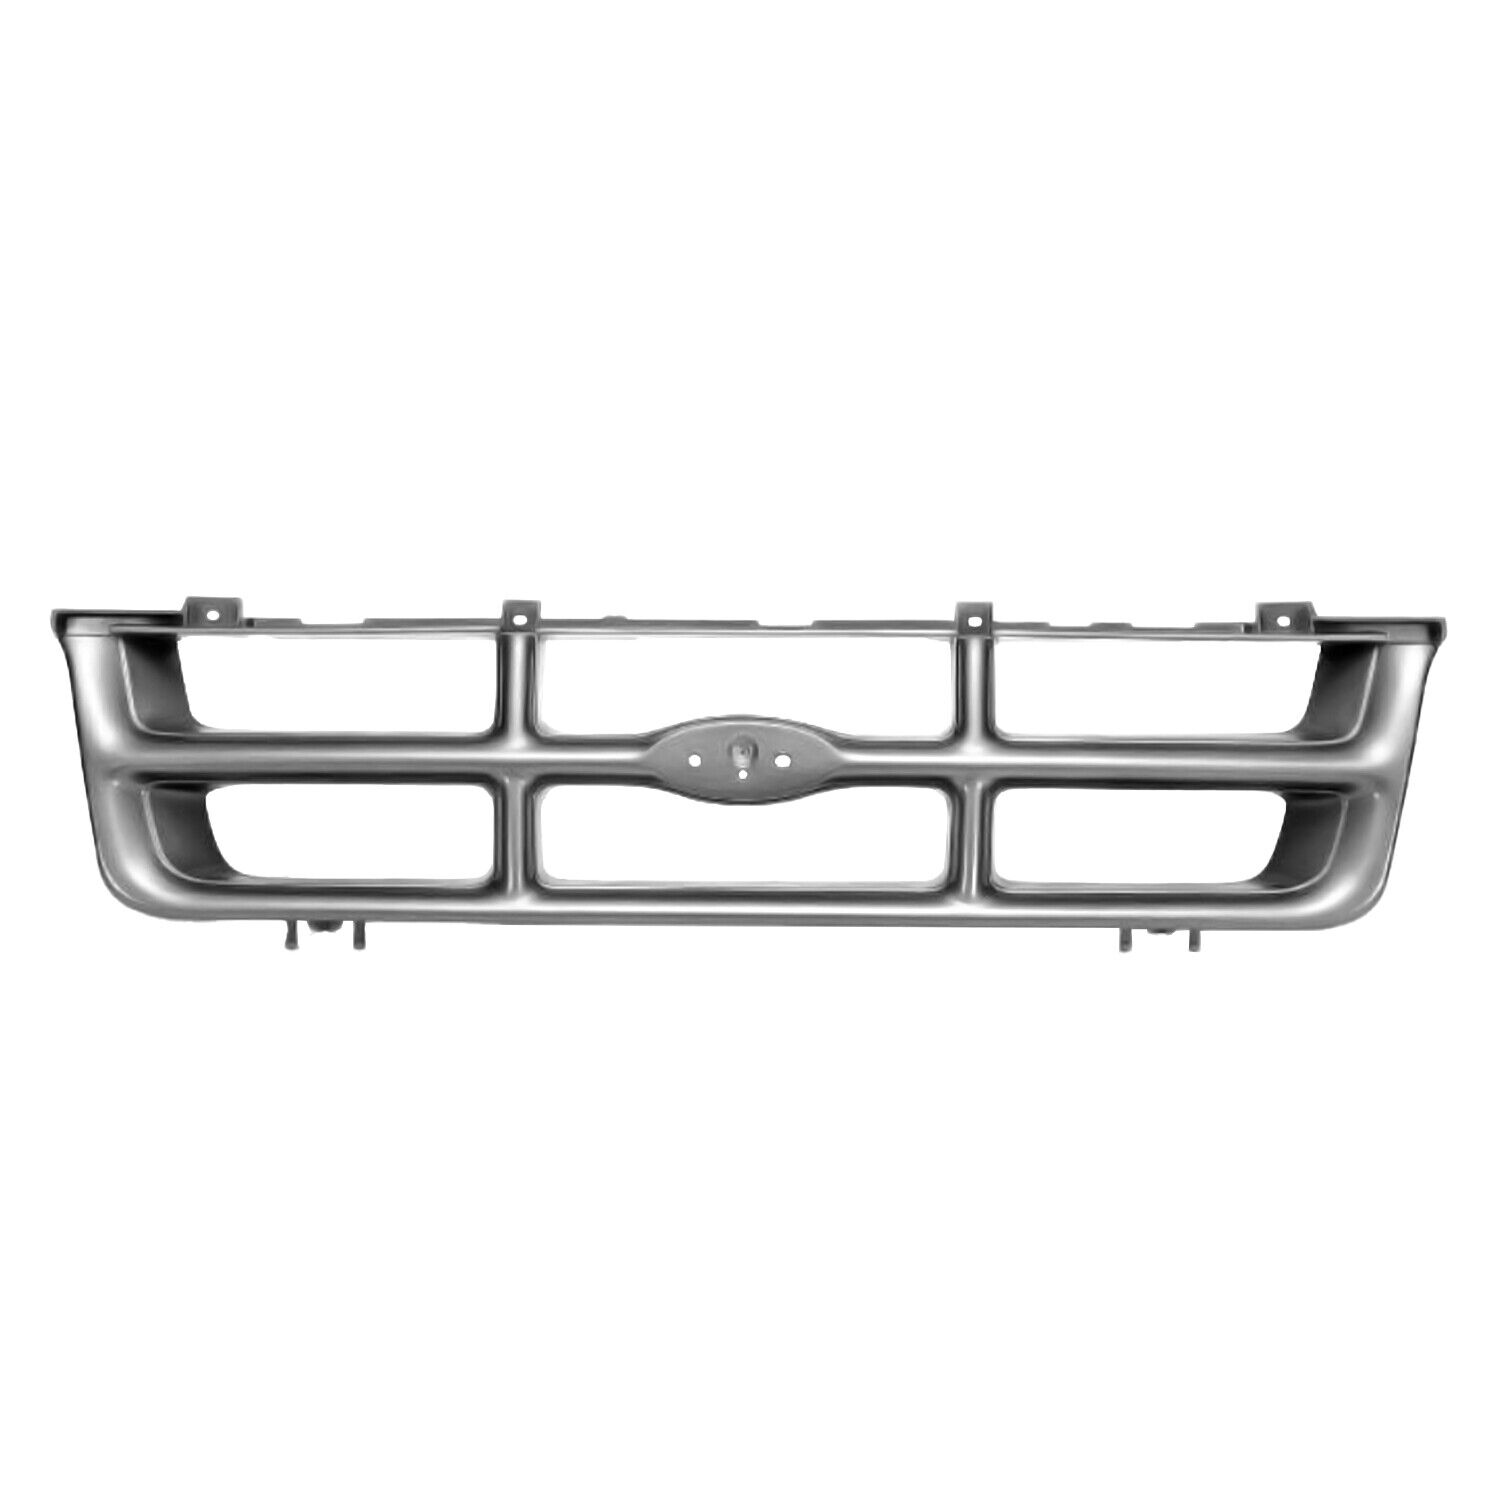 FO1200185 New Grille Fits 1993-1994 Ford Ranger 2WD Silver/Black